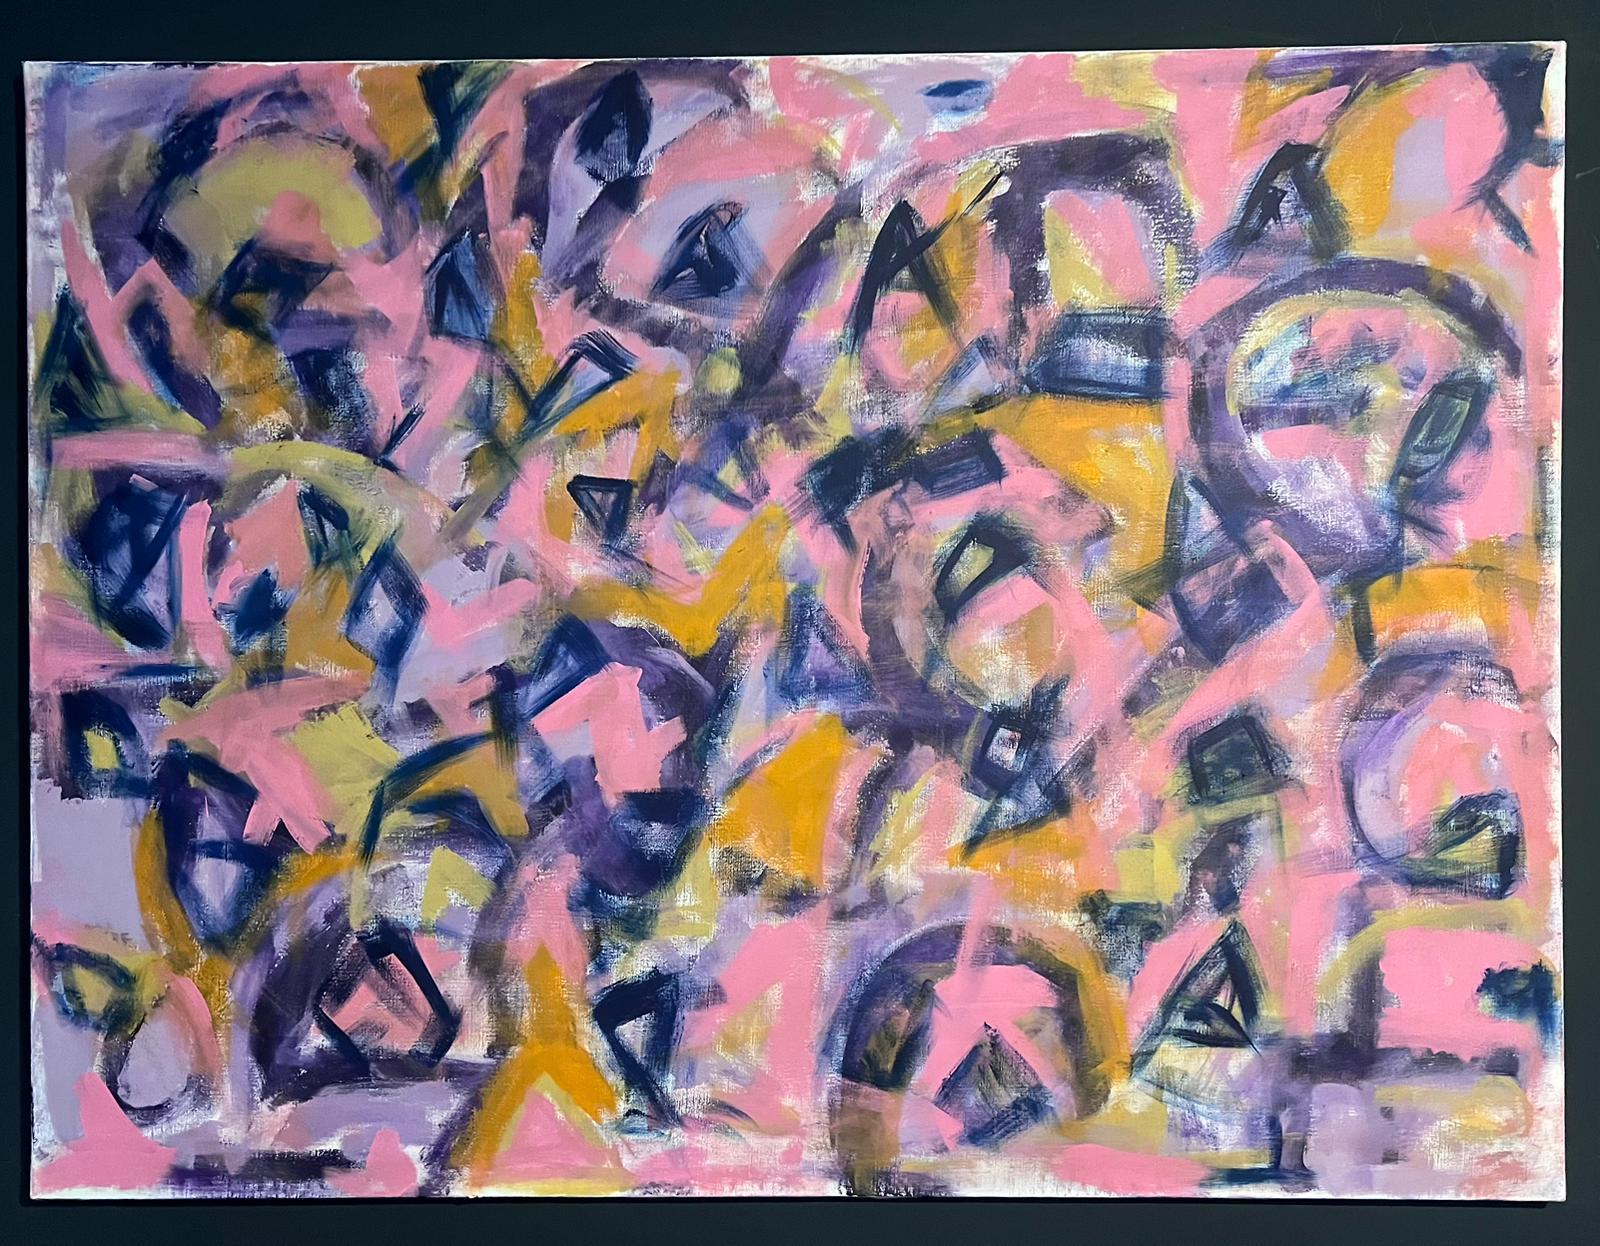 Huge Pink Abstract
by Sally Bradshaw (British, b.1962)
57 x 74 inches
acrylic paint on linen canvas

Superb original modern abstract expressionist painting by the contemporary British painter, Sally Bradshaw (b.1962).

Very good condition.
